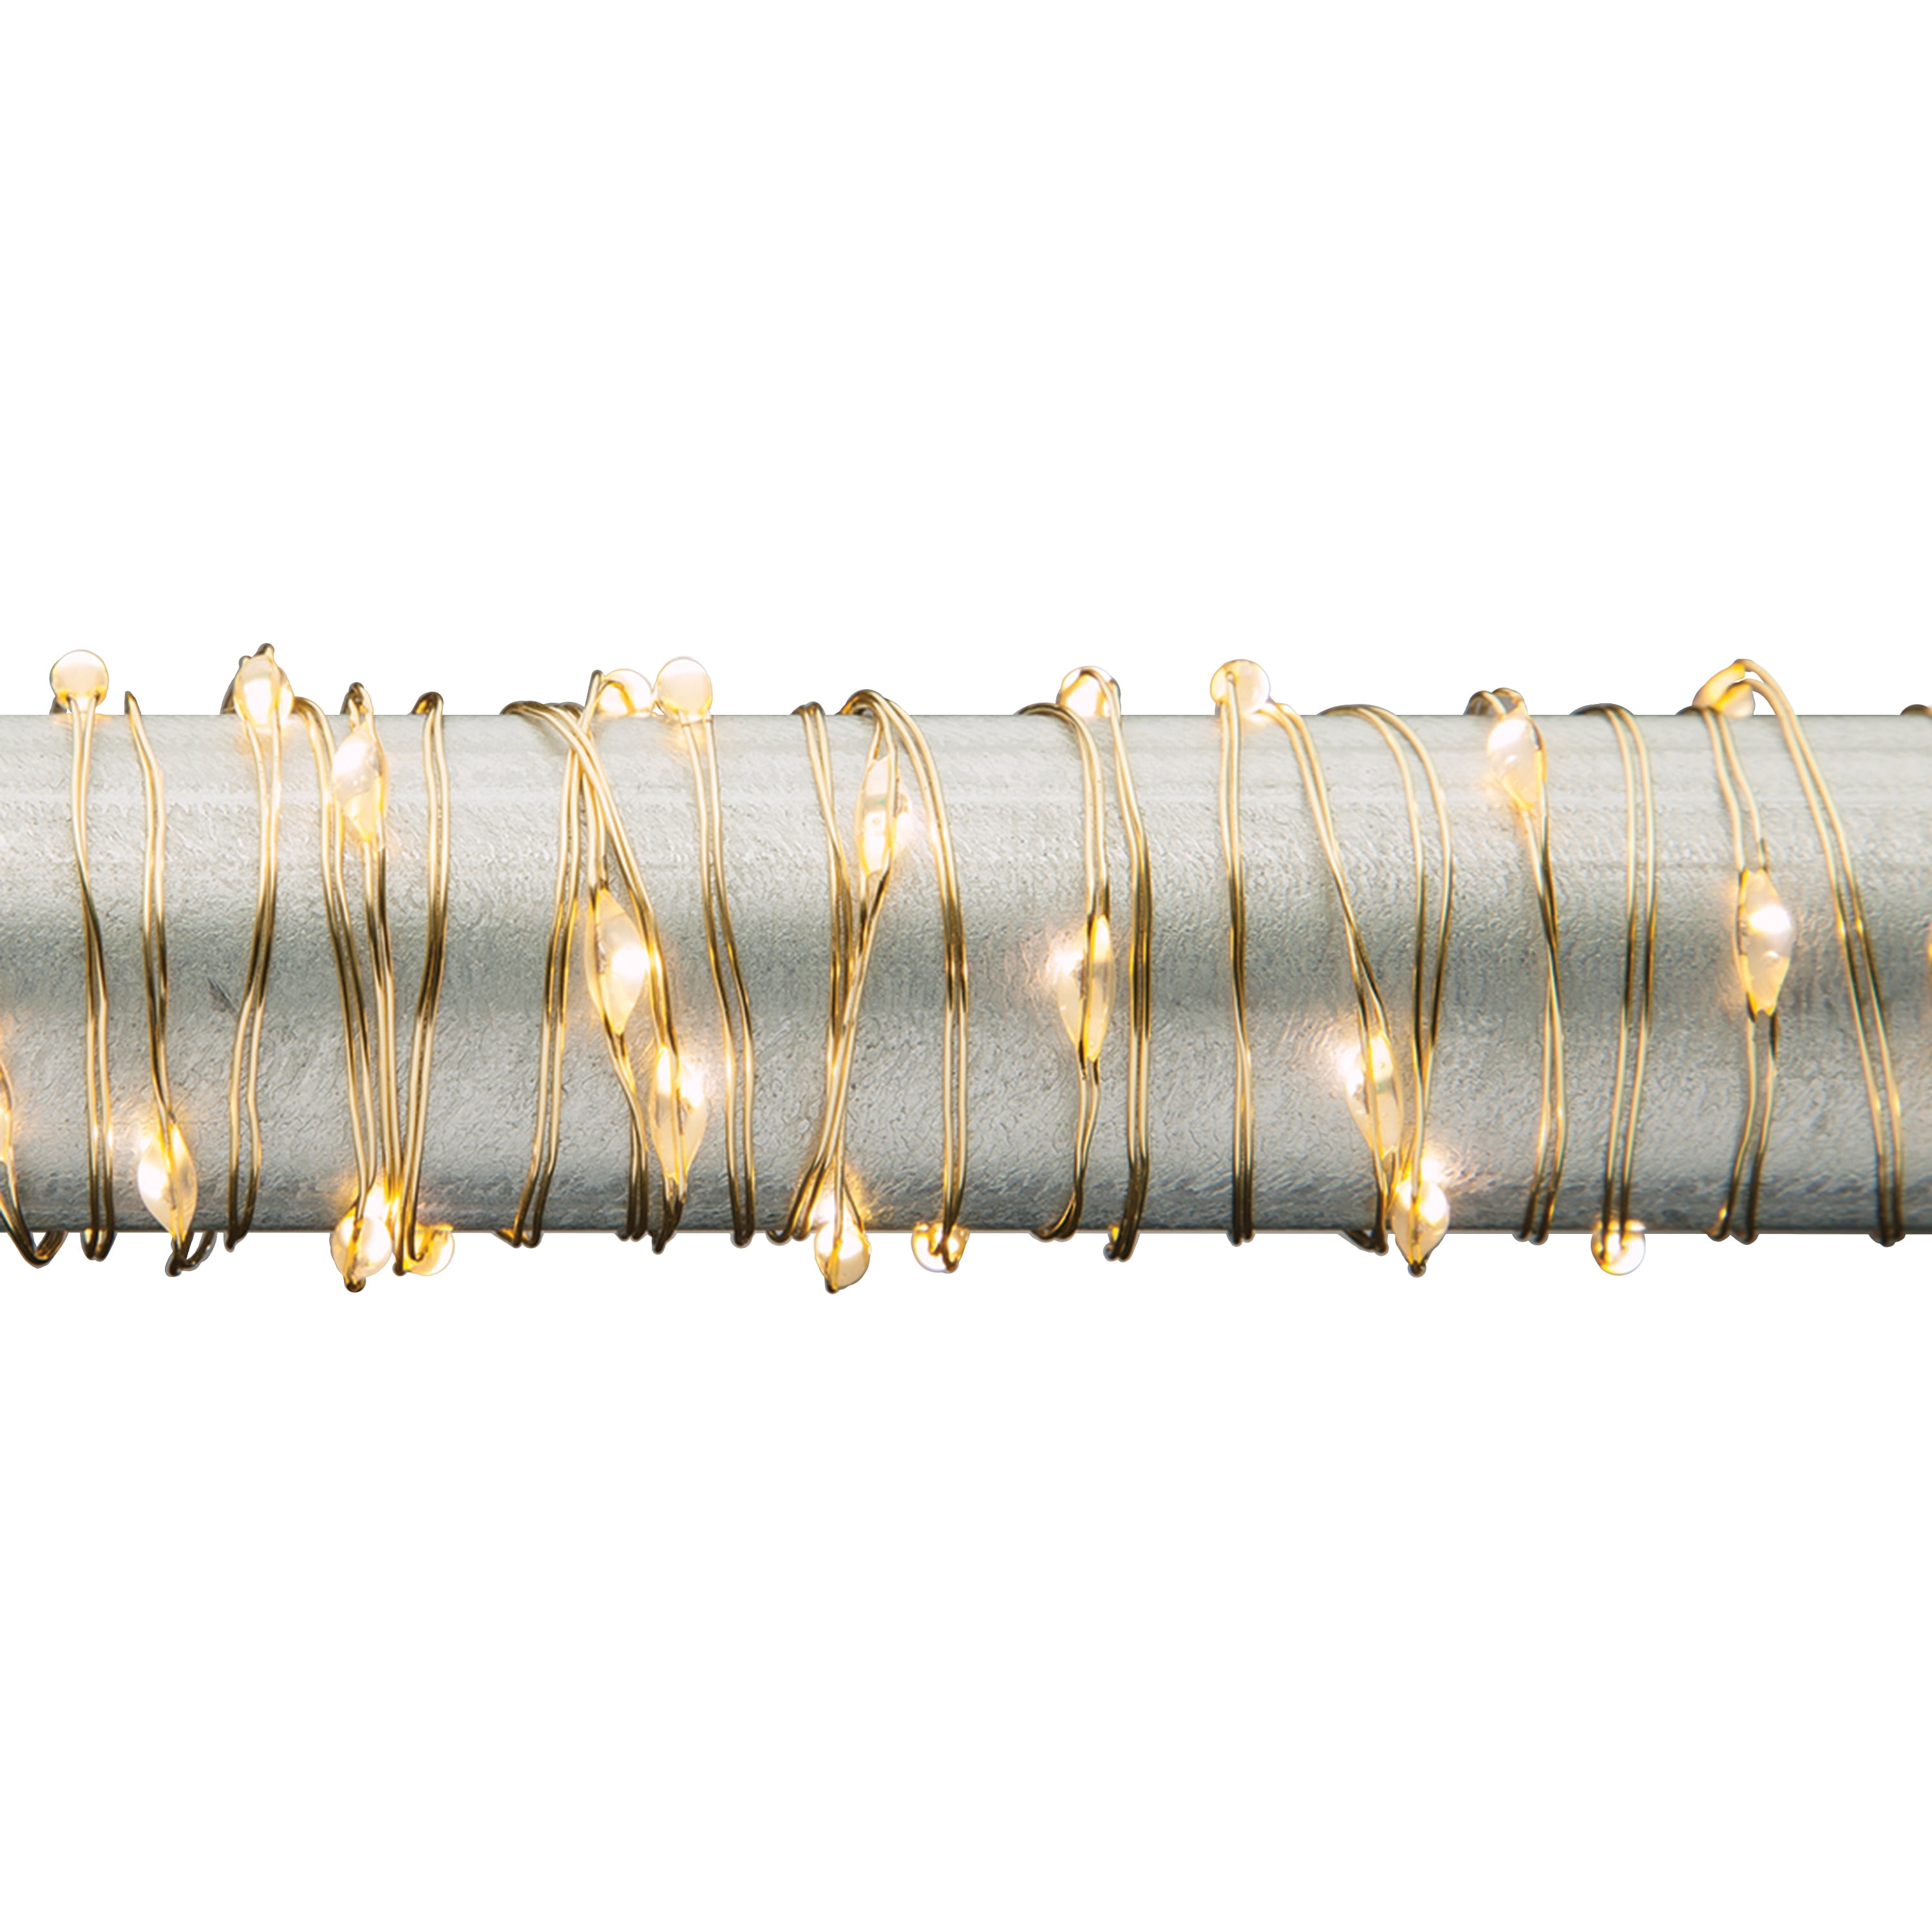 11-Foot Long Golden LED Light String with LED Lights and Timer Feature ...